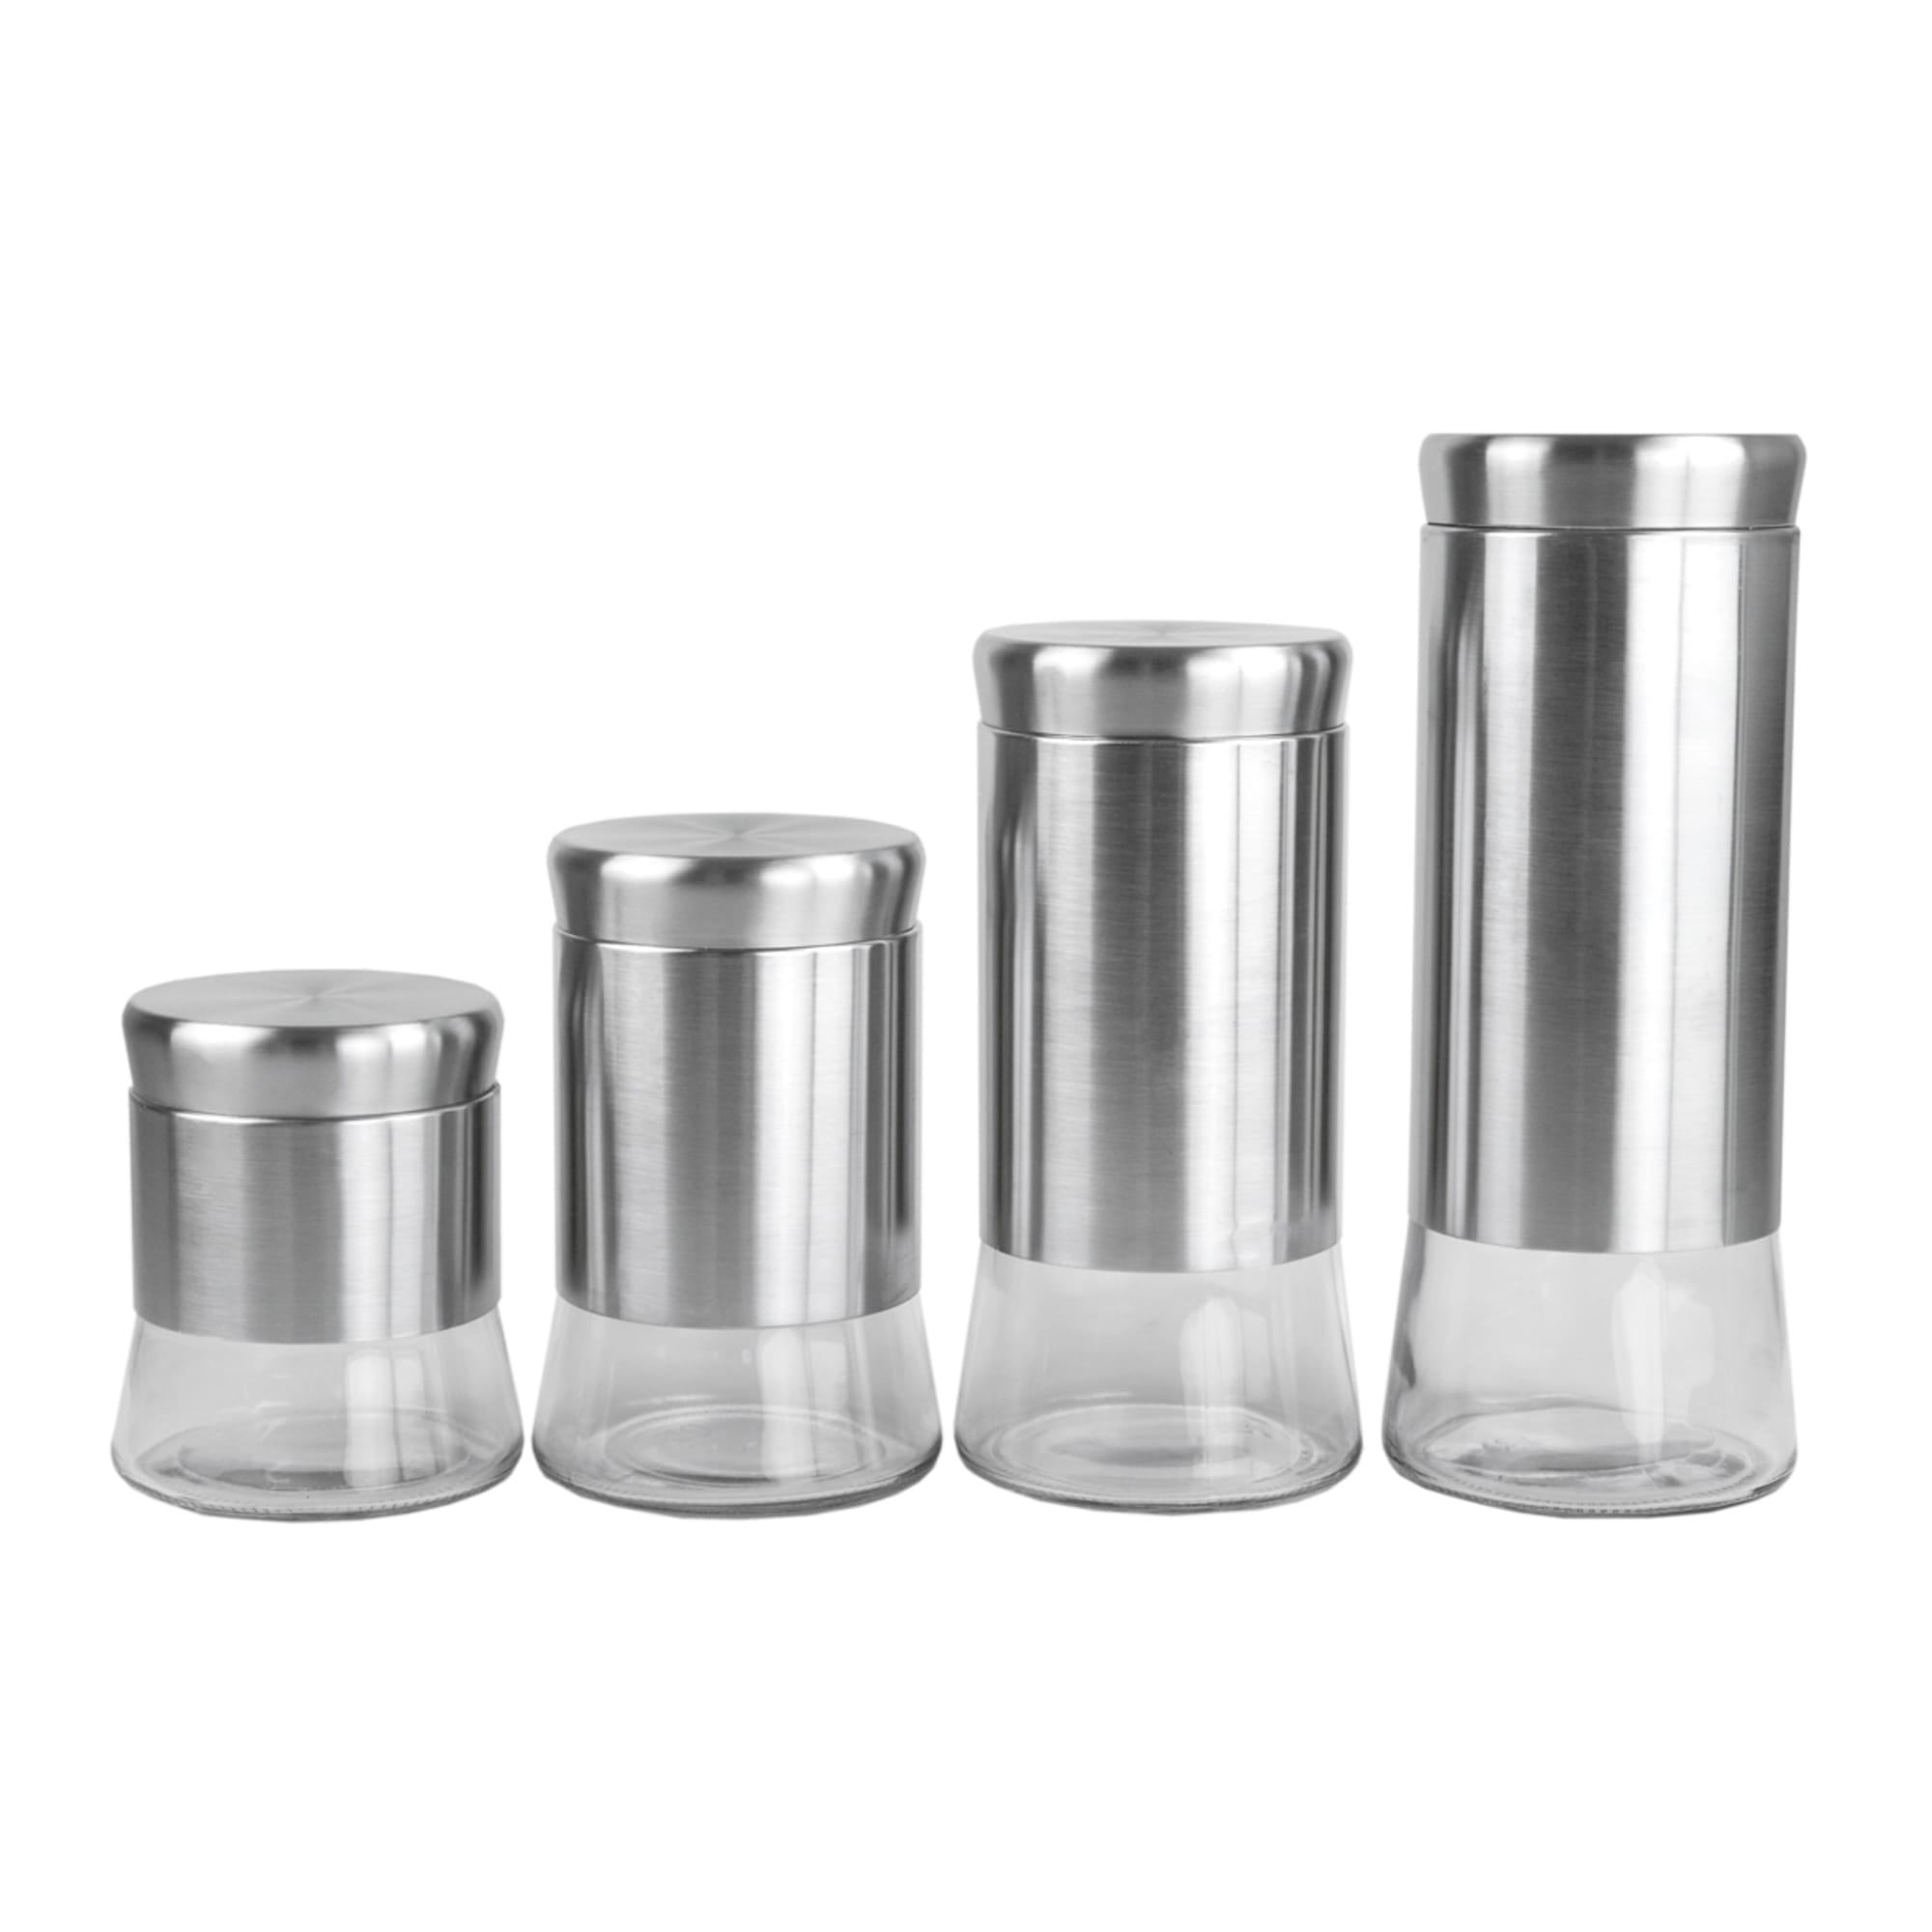 Home Basics Essence Collection 4 Piece Stainless Steel Canister Set $15.00 EACH, CASE PACK OF 4